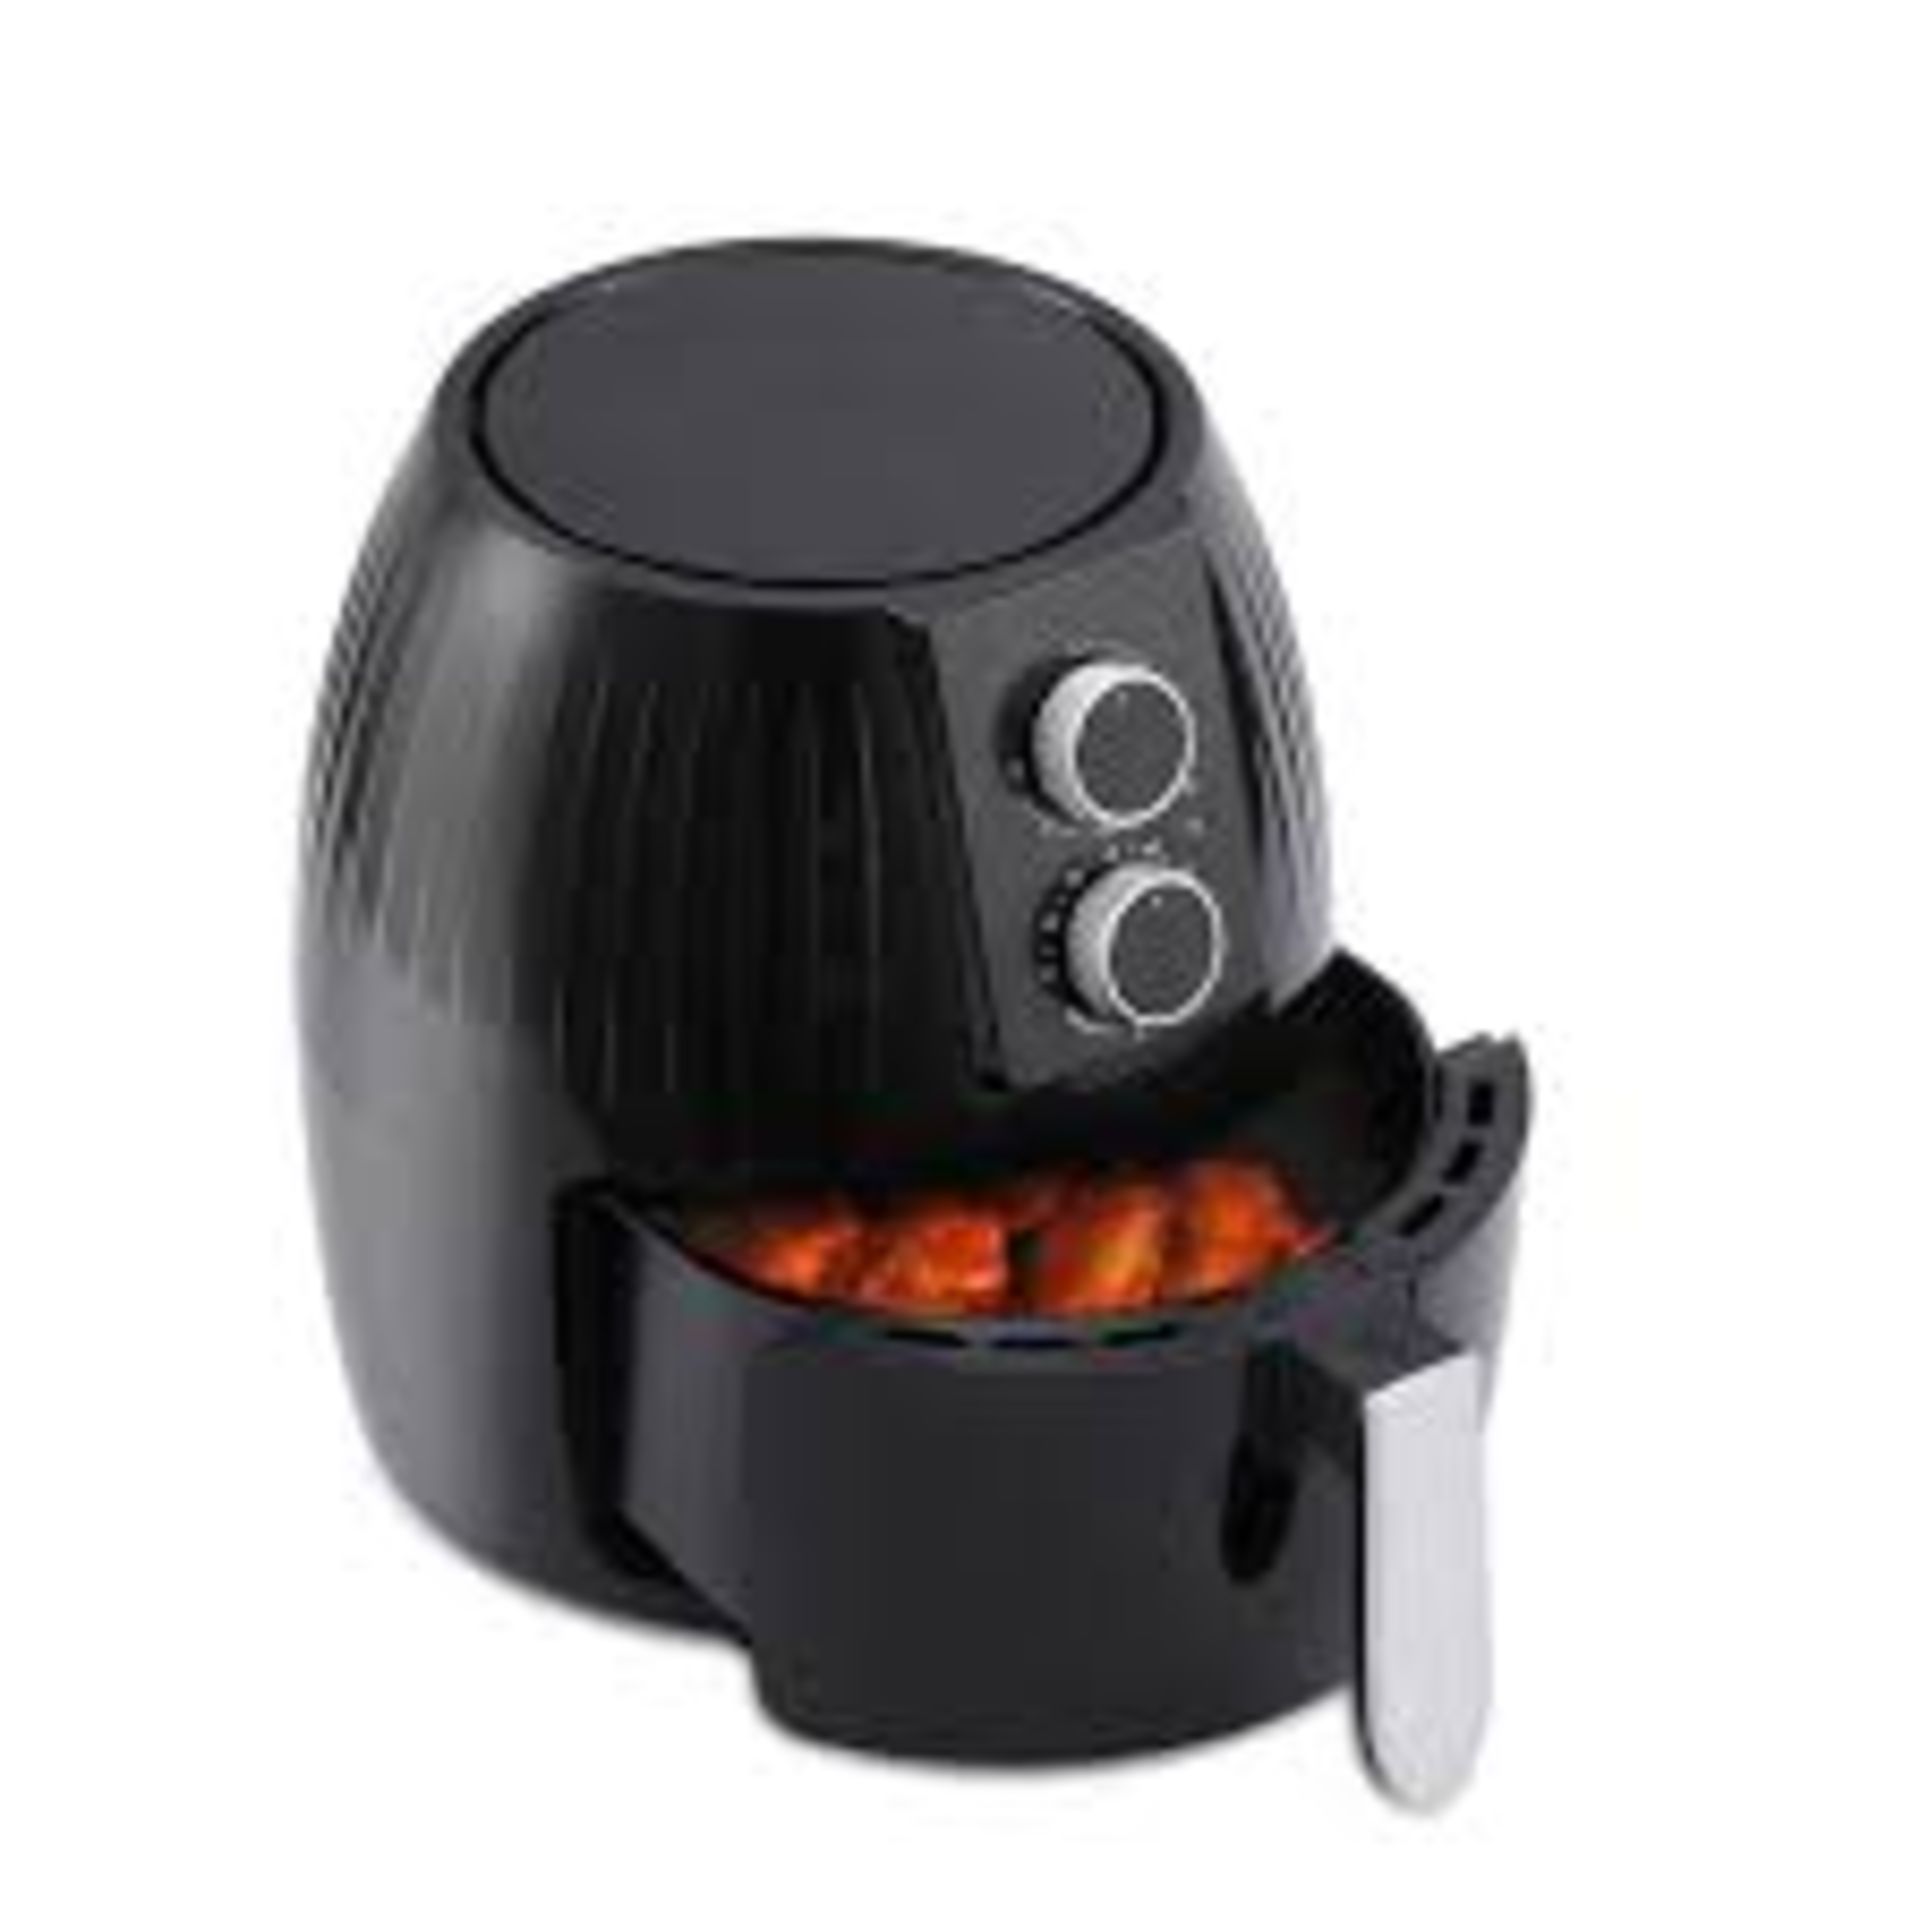 Elder 4.5 L Air Fryer. Versatile Functional Air Fryer Oven——This all-in-1 machine is not only an air